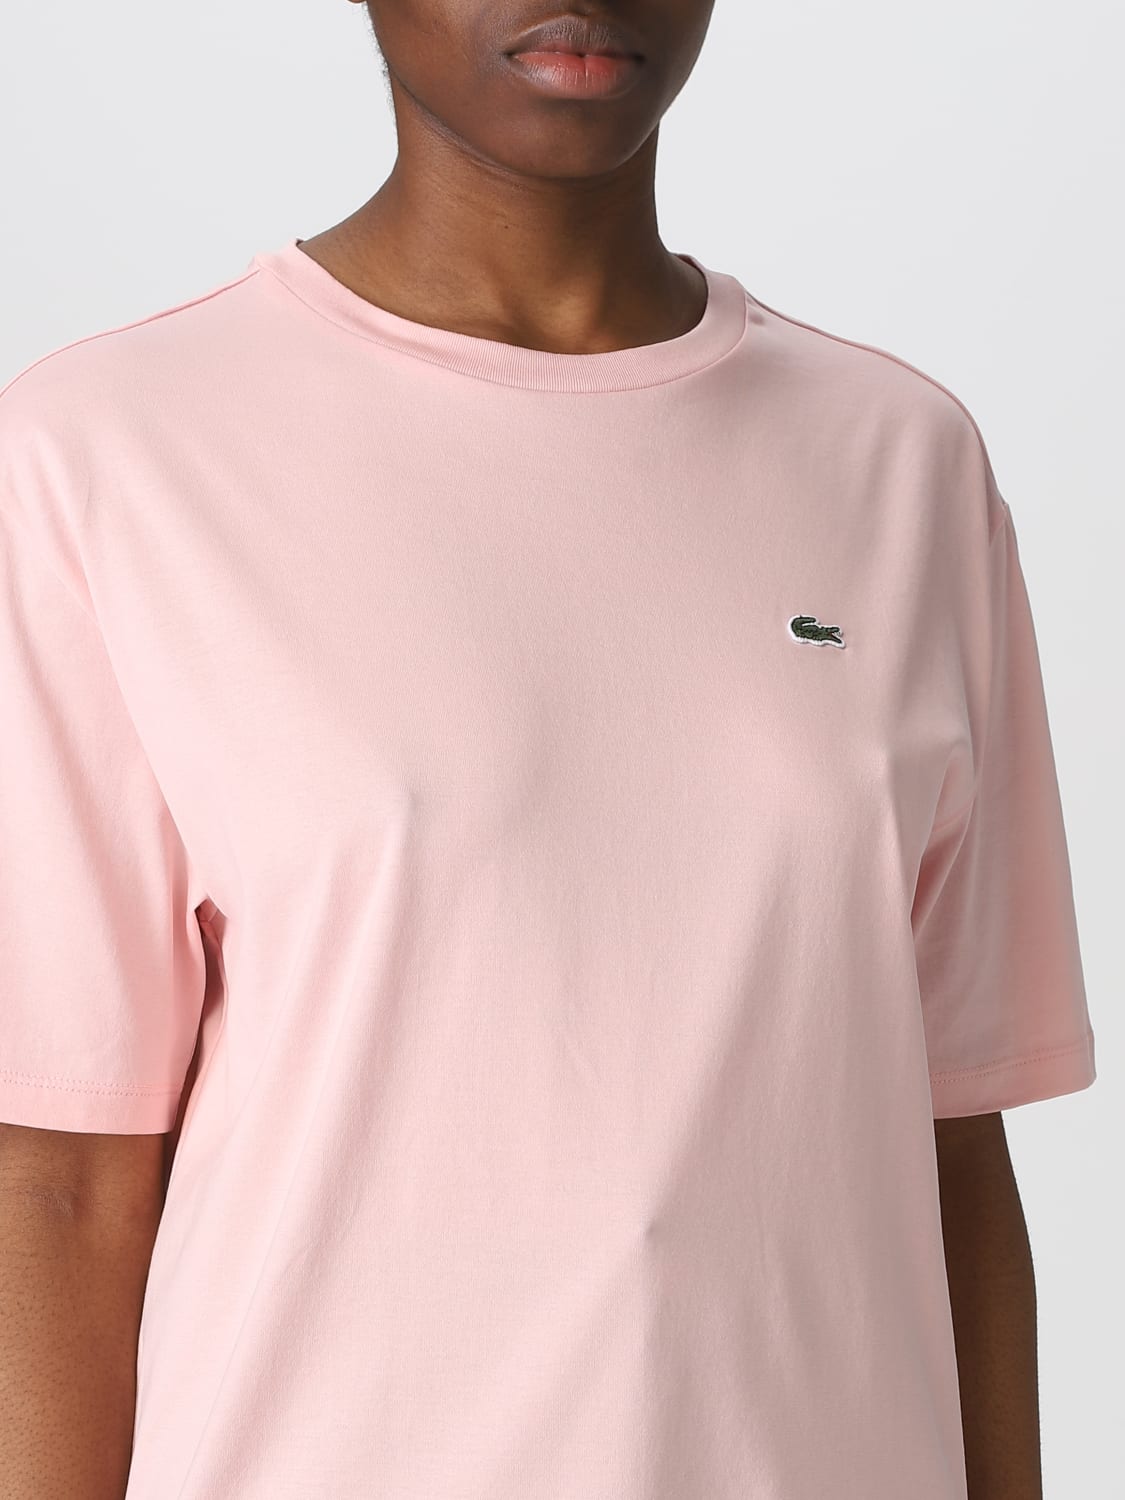 LACOSTE: t-shirt for - Pink | Lacoste t-shirt TF5441 online at GIGLIO.COM